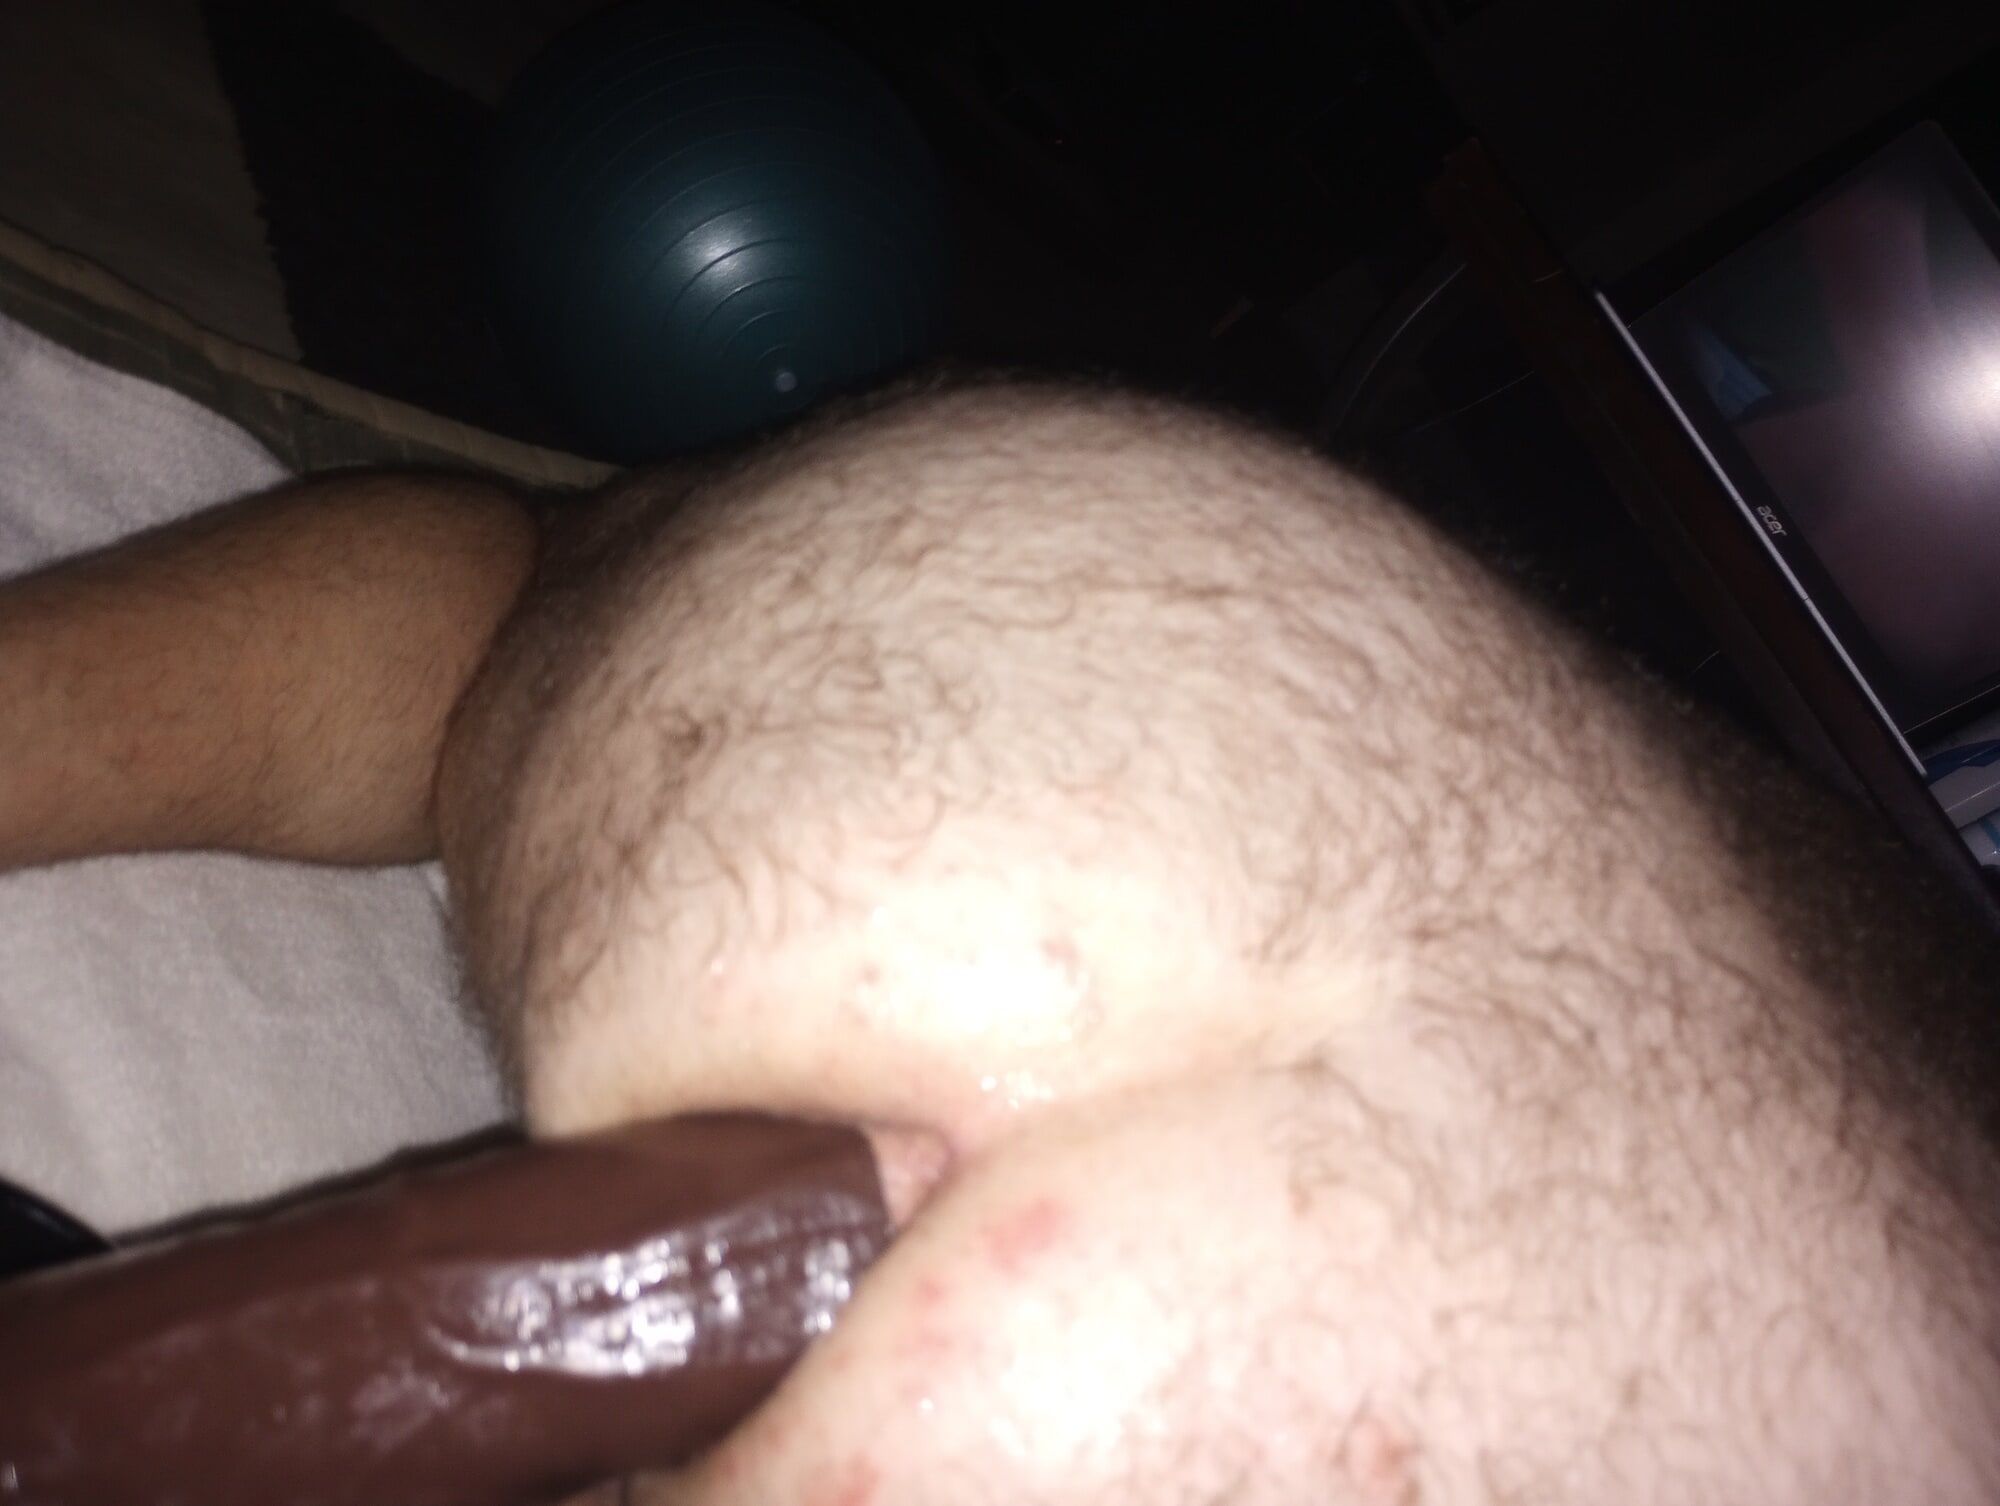 More dildos gaping my hole